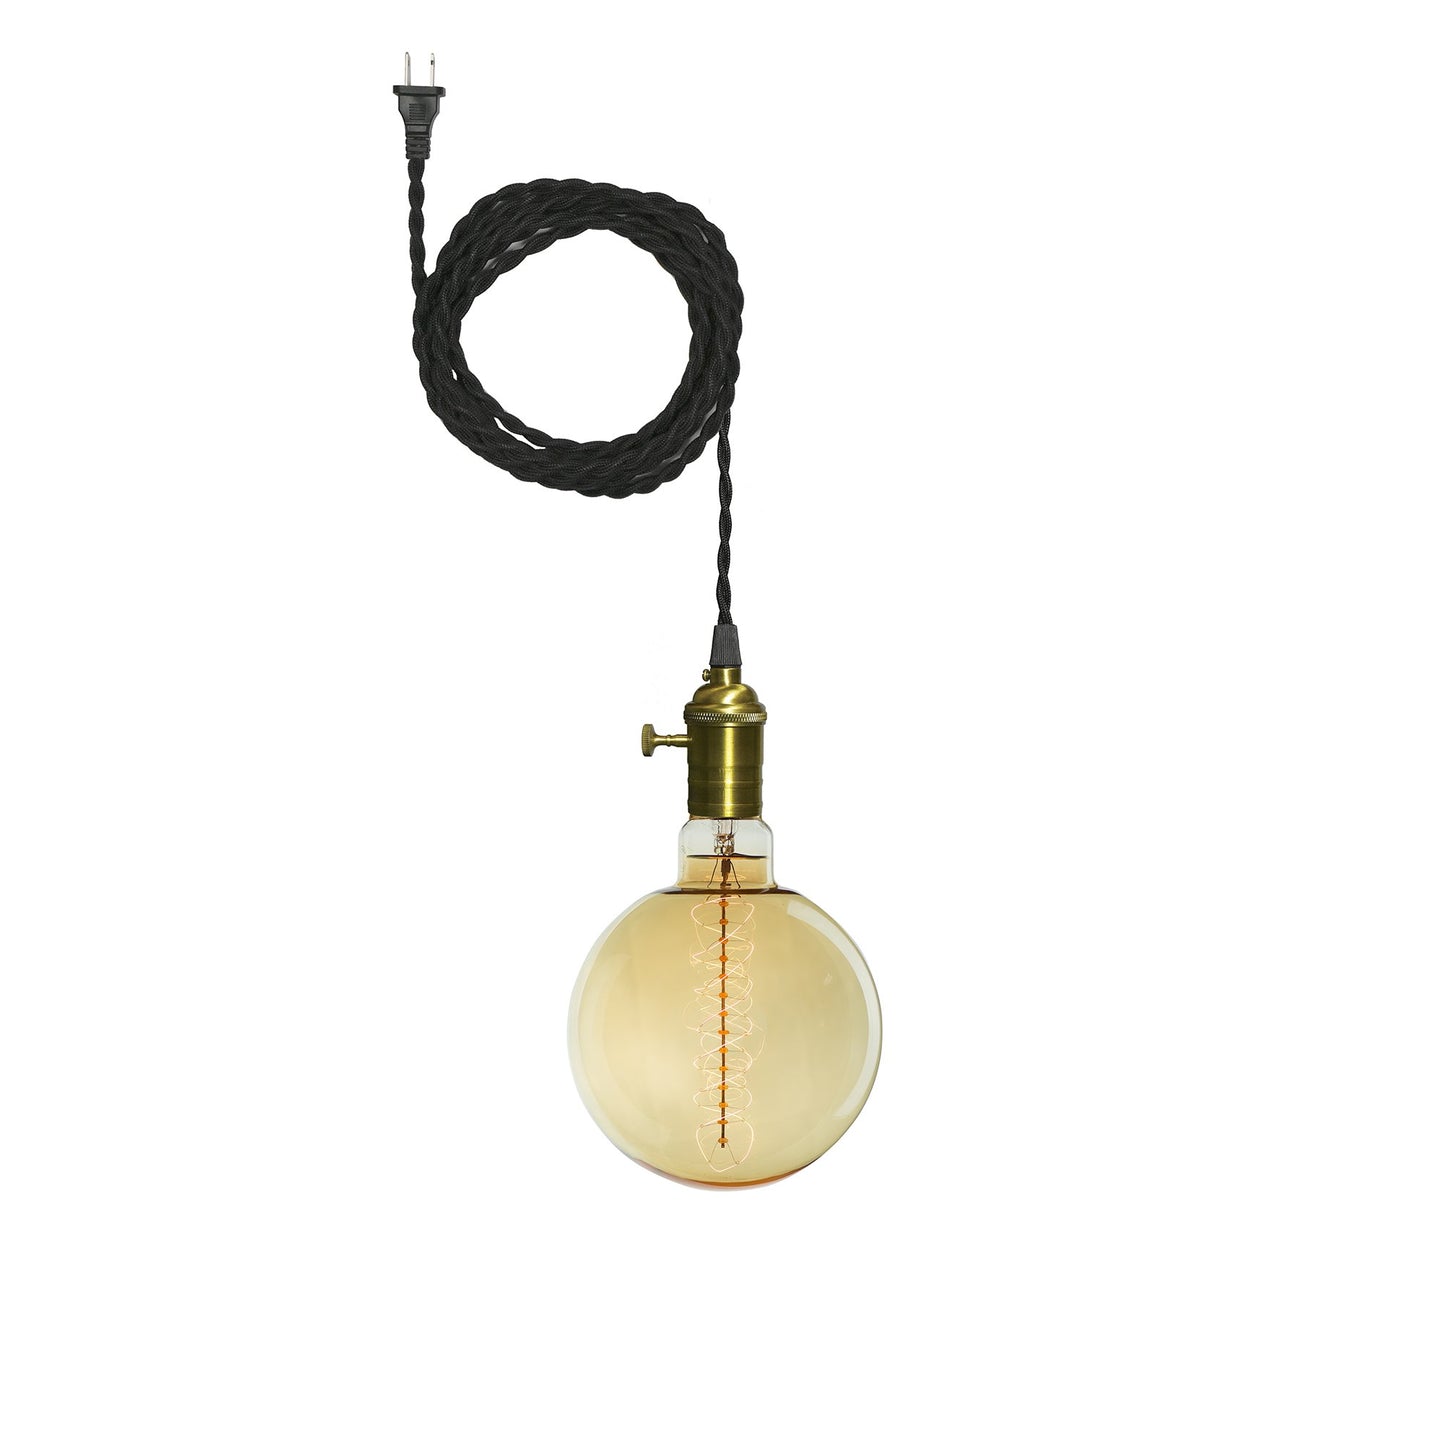 BULBRITE FIXTURES PLUG IN PENDANT KIT VINTAGE BRONZE SOCKET WITH BLACK CORD AND INCANDESCENT G63 MEDIUM SCREW (E26) 60W NON-DIMMABLE ANTIQUE LIGHT BULB 2200K/AMBER 1PK (810013)